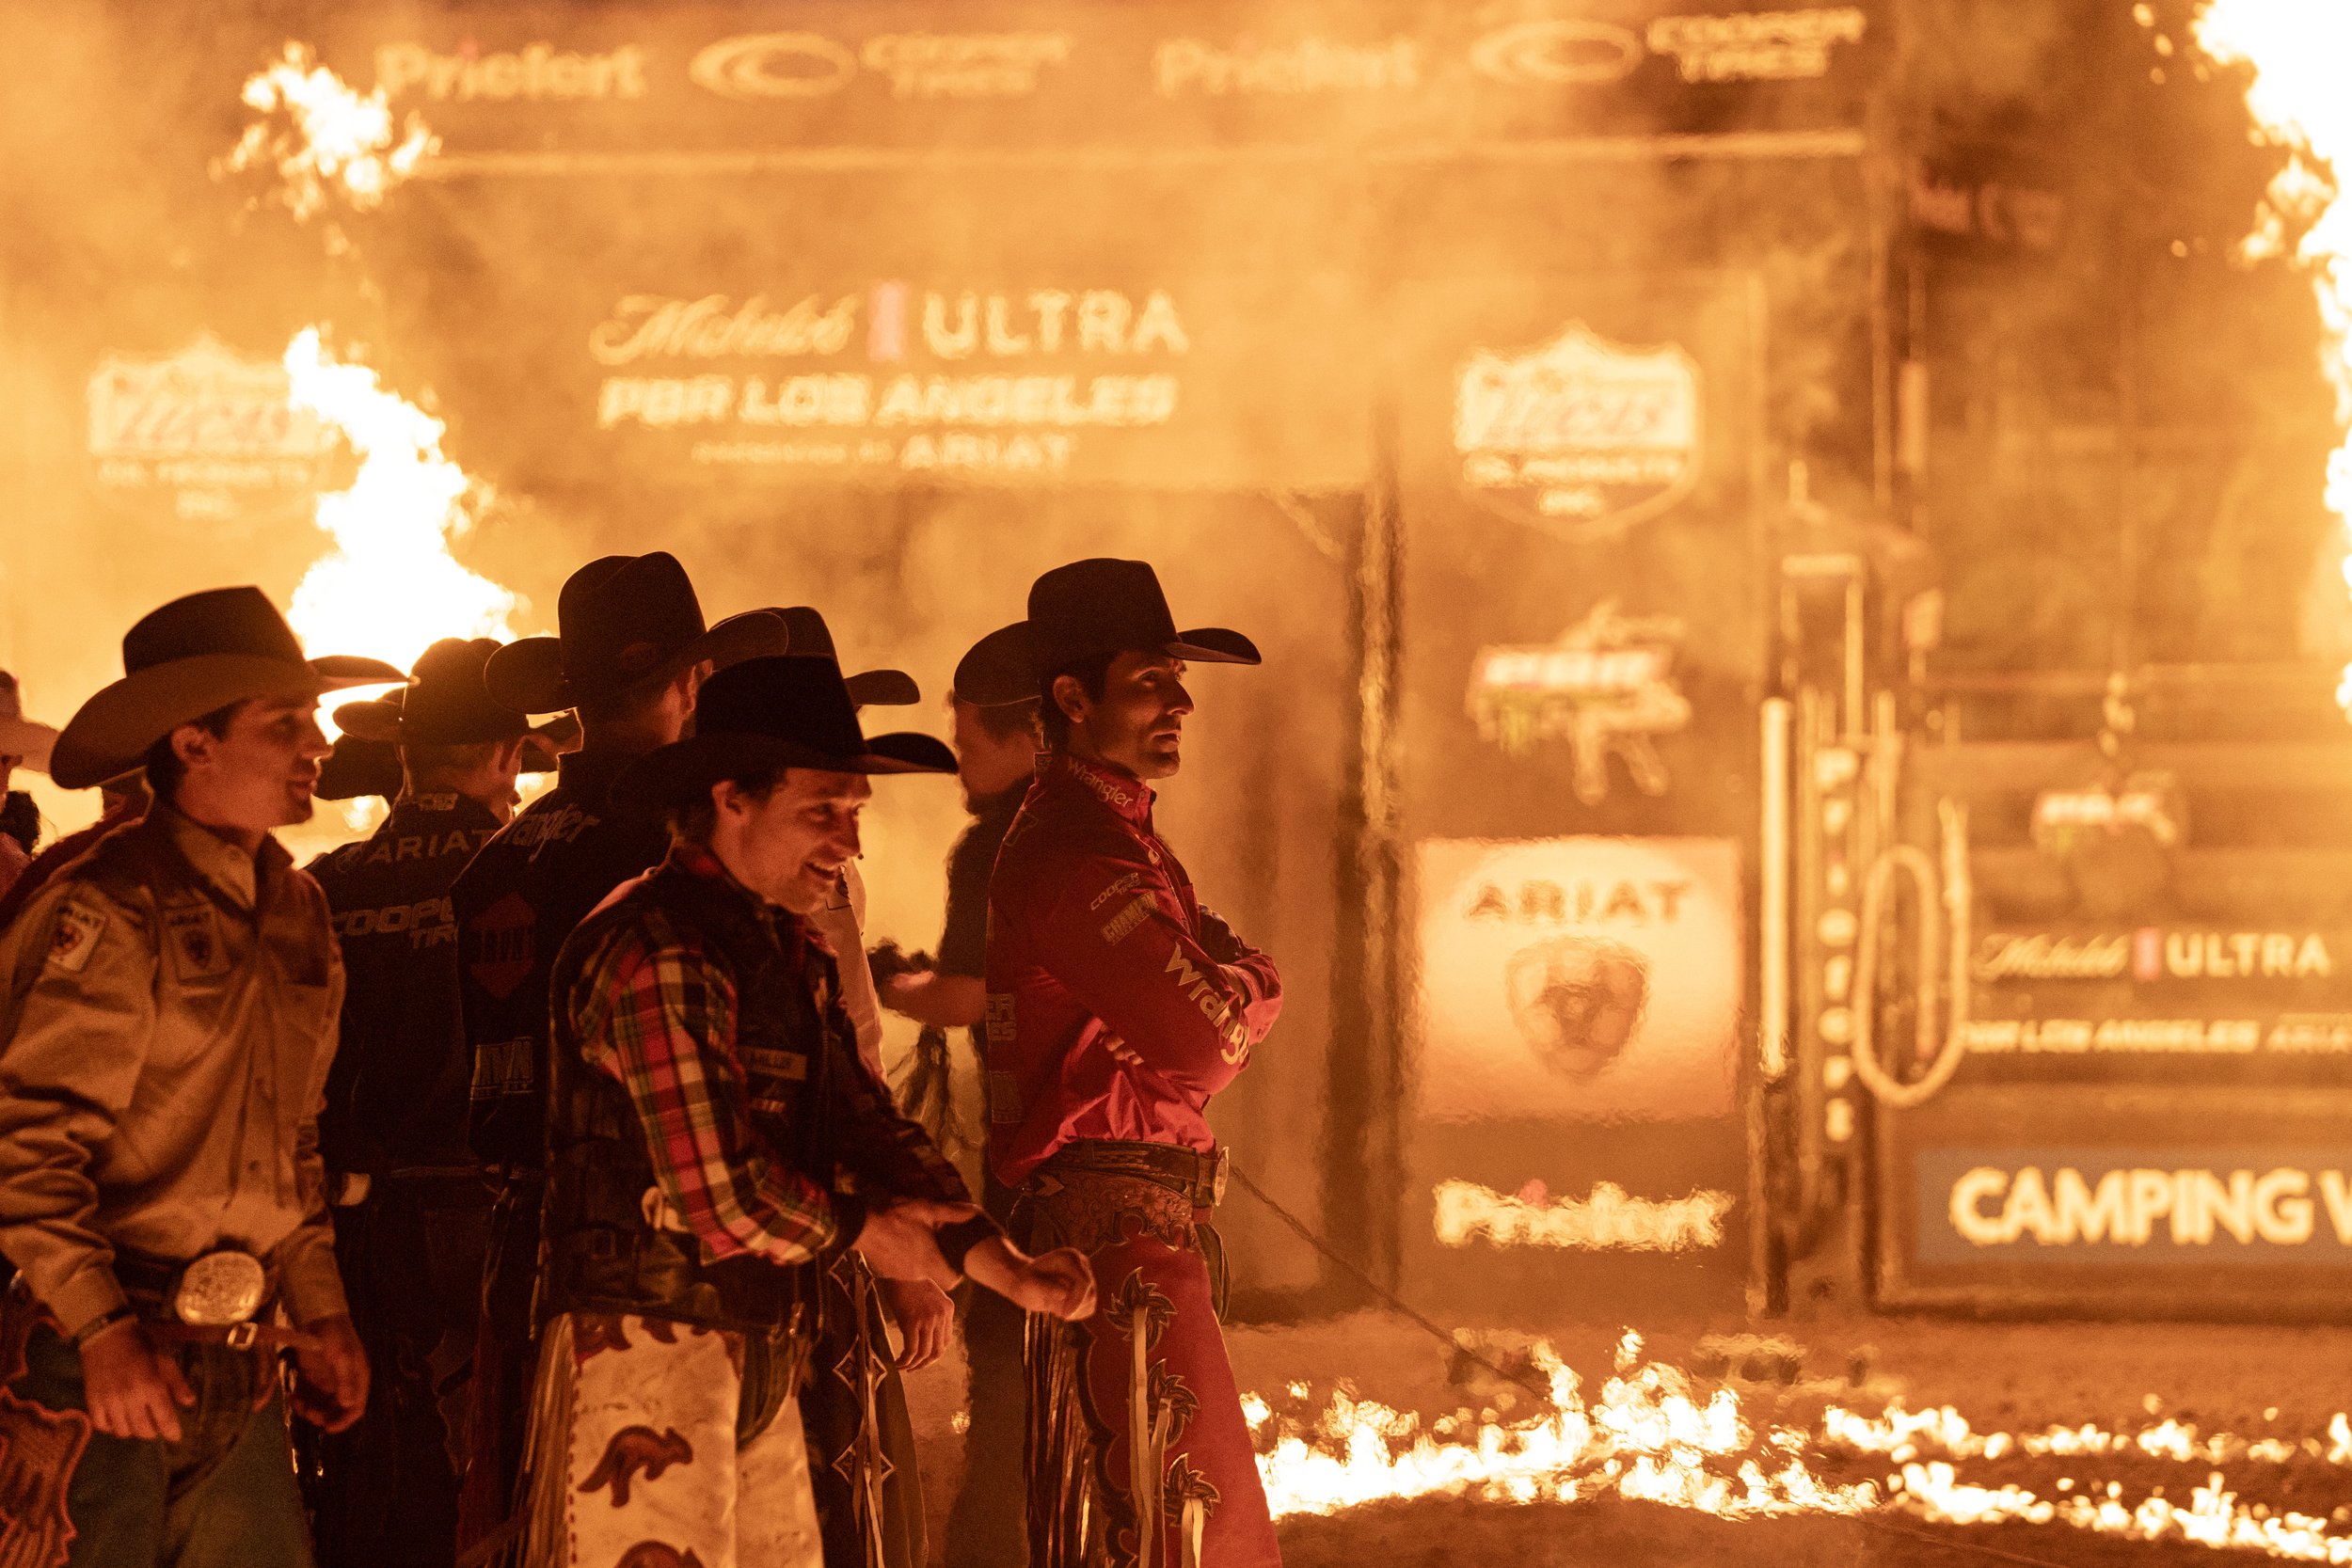  Professional Bull Riders being introduced in a circle of flames before the start pf the event in Los Angeles, Calif. at Crypto.com Arena on Saturday, Feb.16, 2023. (Danilo Perez | The Corsair) 